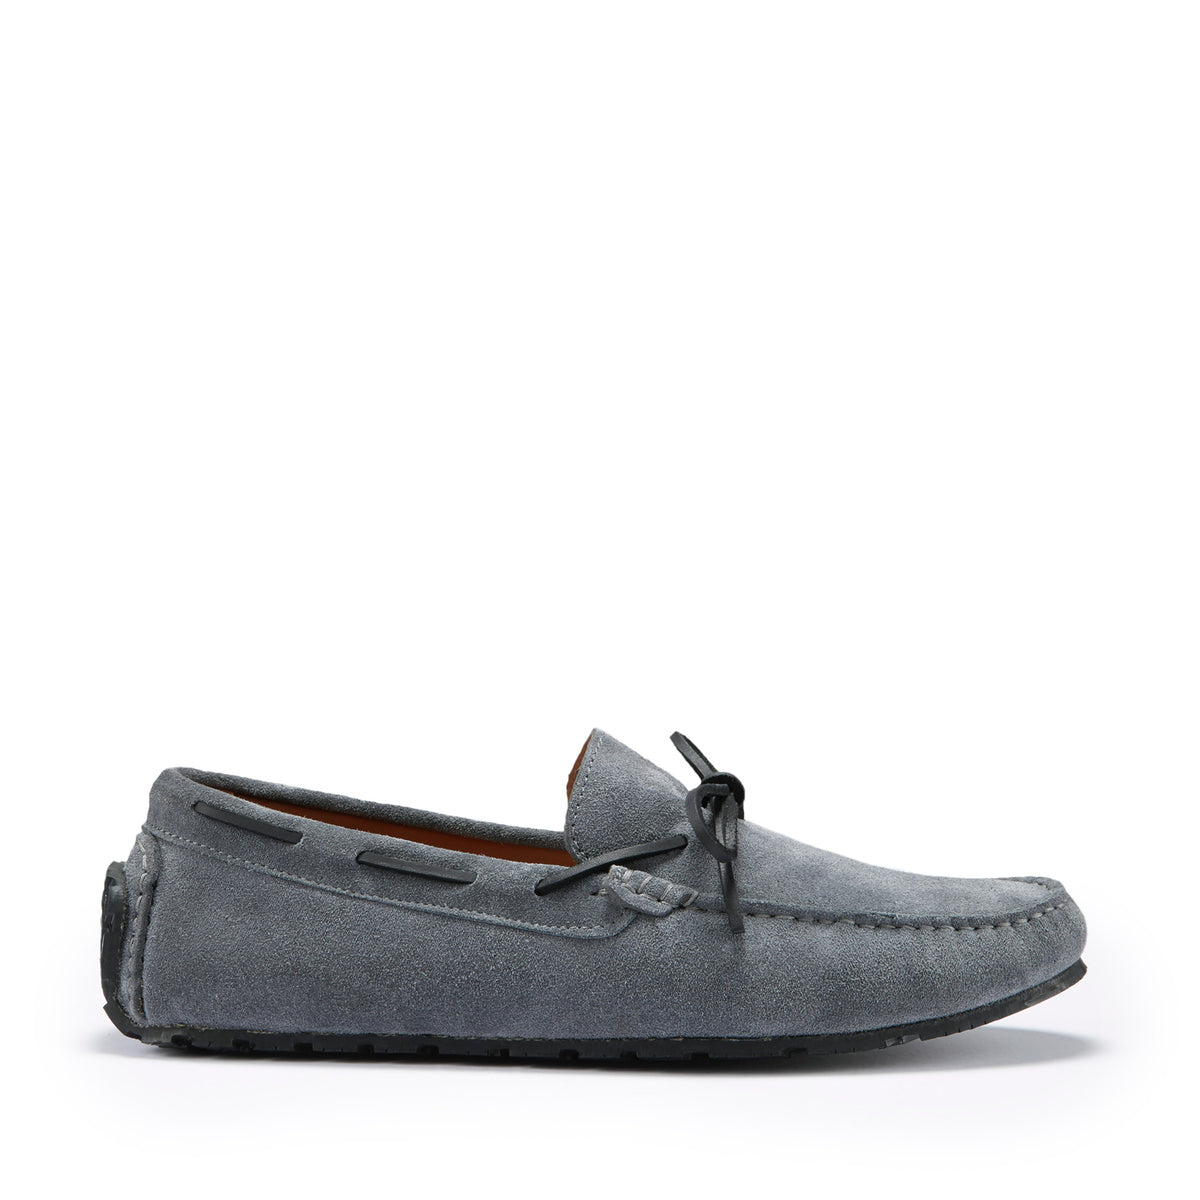 Tyre Sole Laced Driving Loafers, slate grey suede